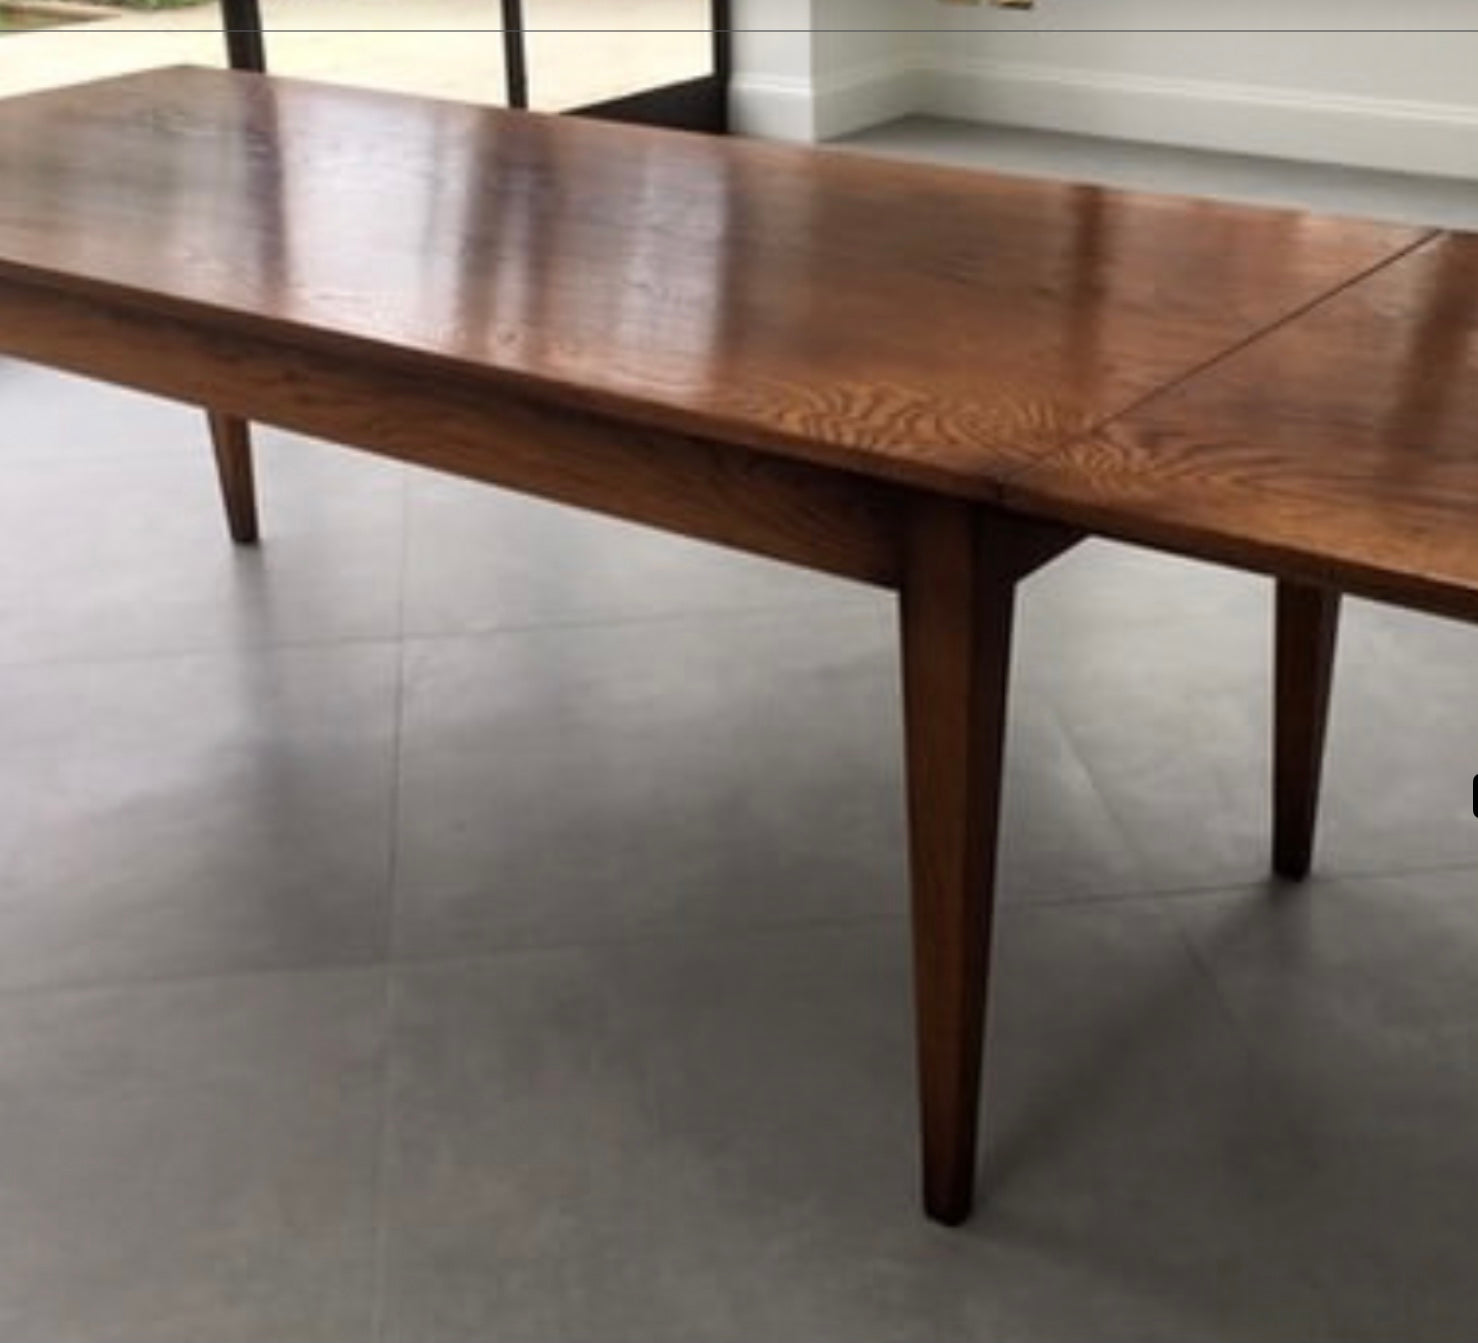 Made to Measure Tables